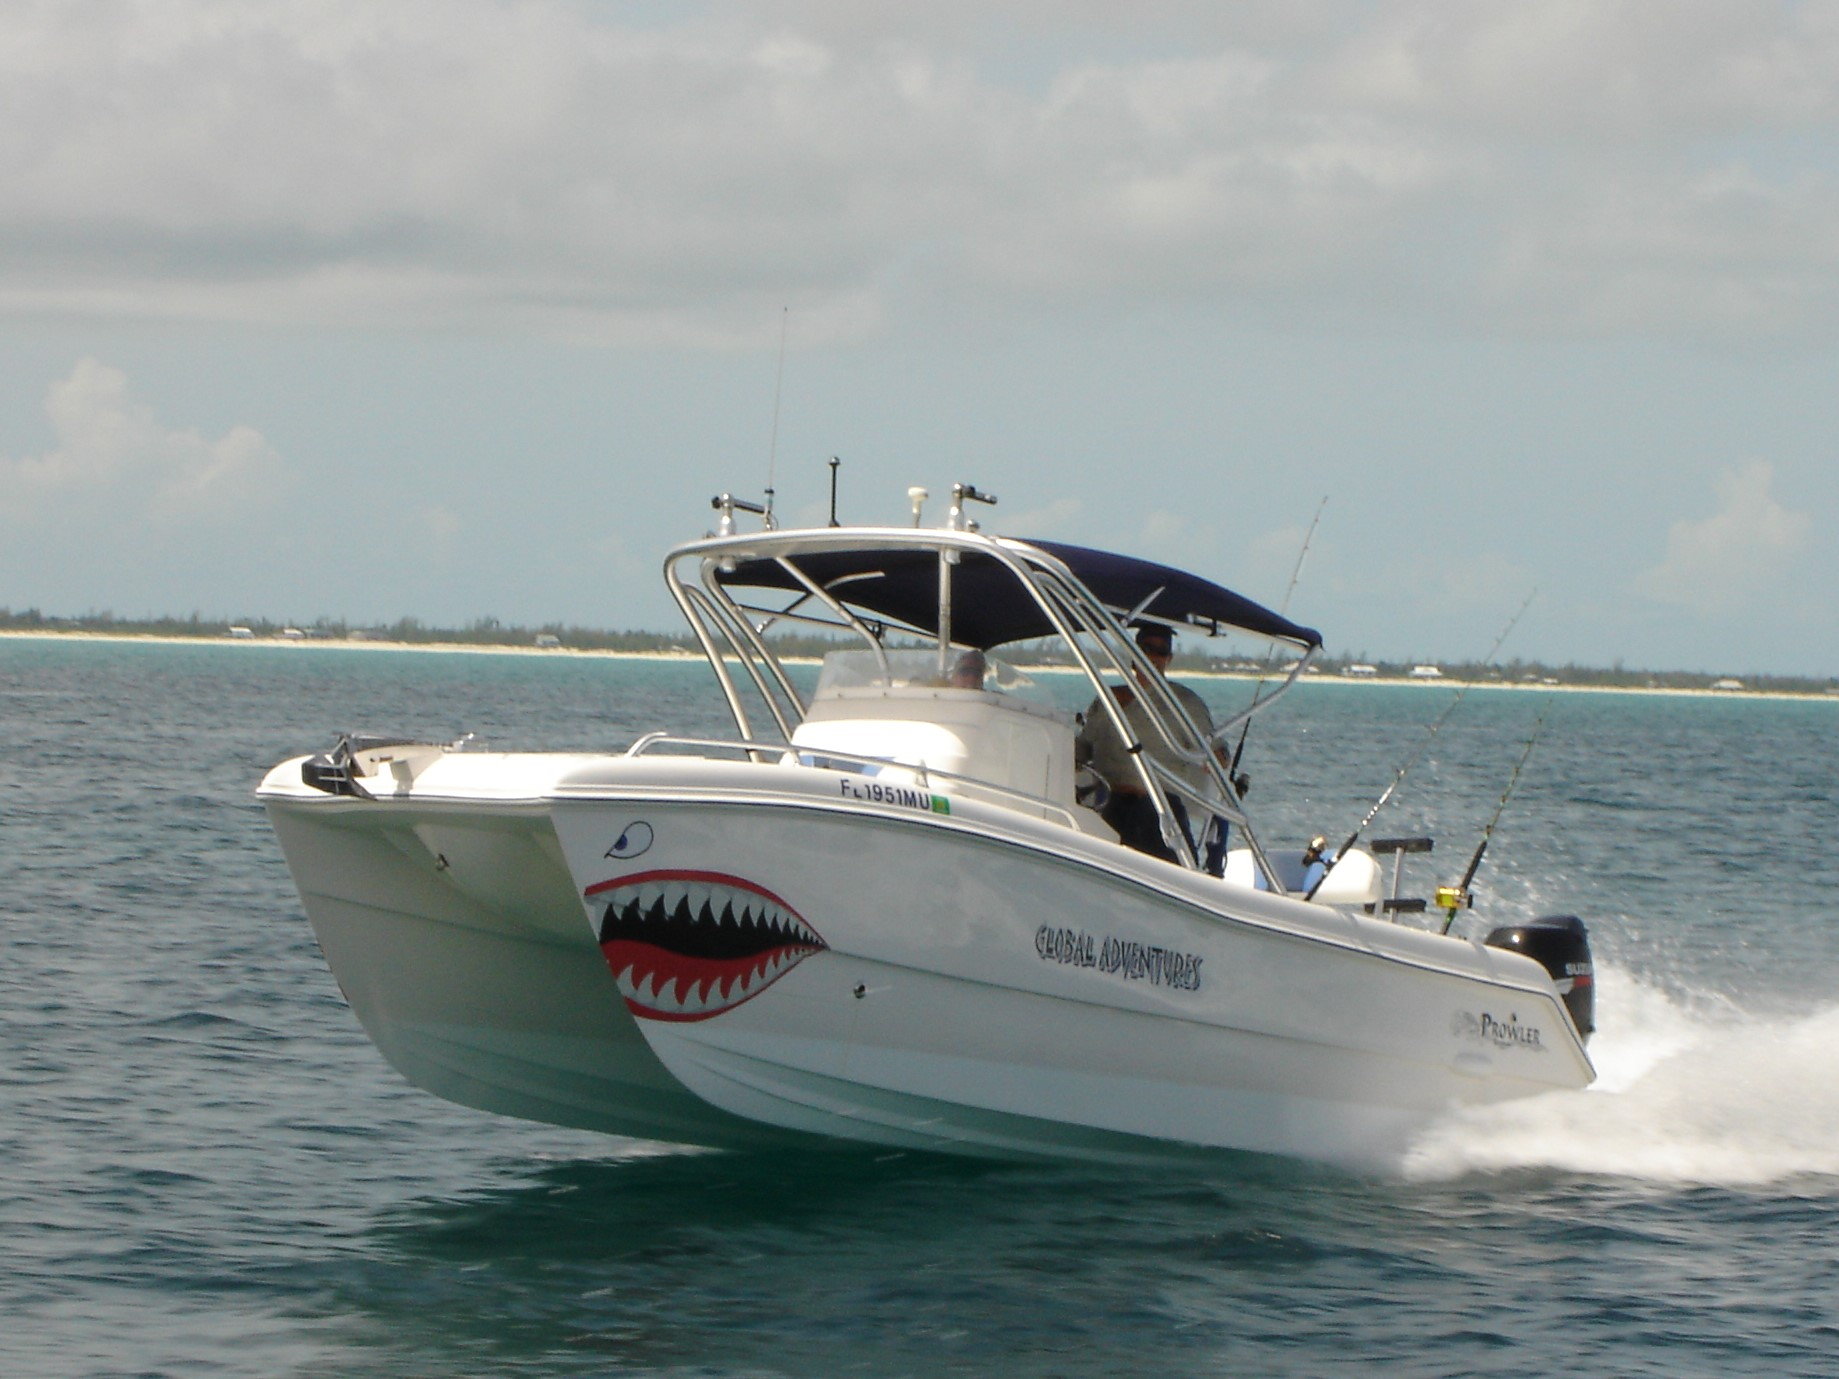 Renaissance Prowler 25 (for sale by original owner) - The Hull